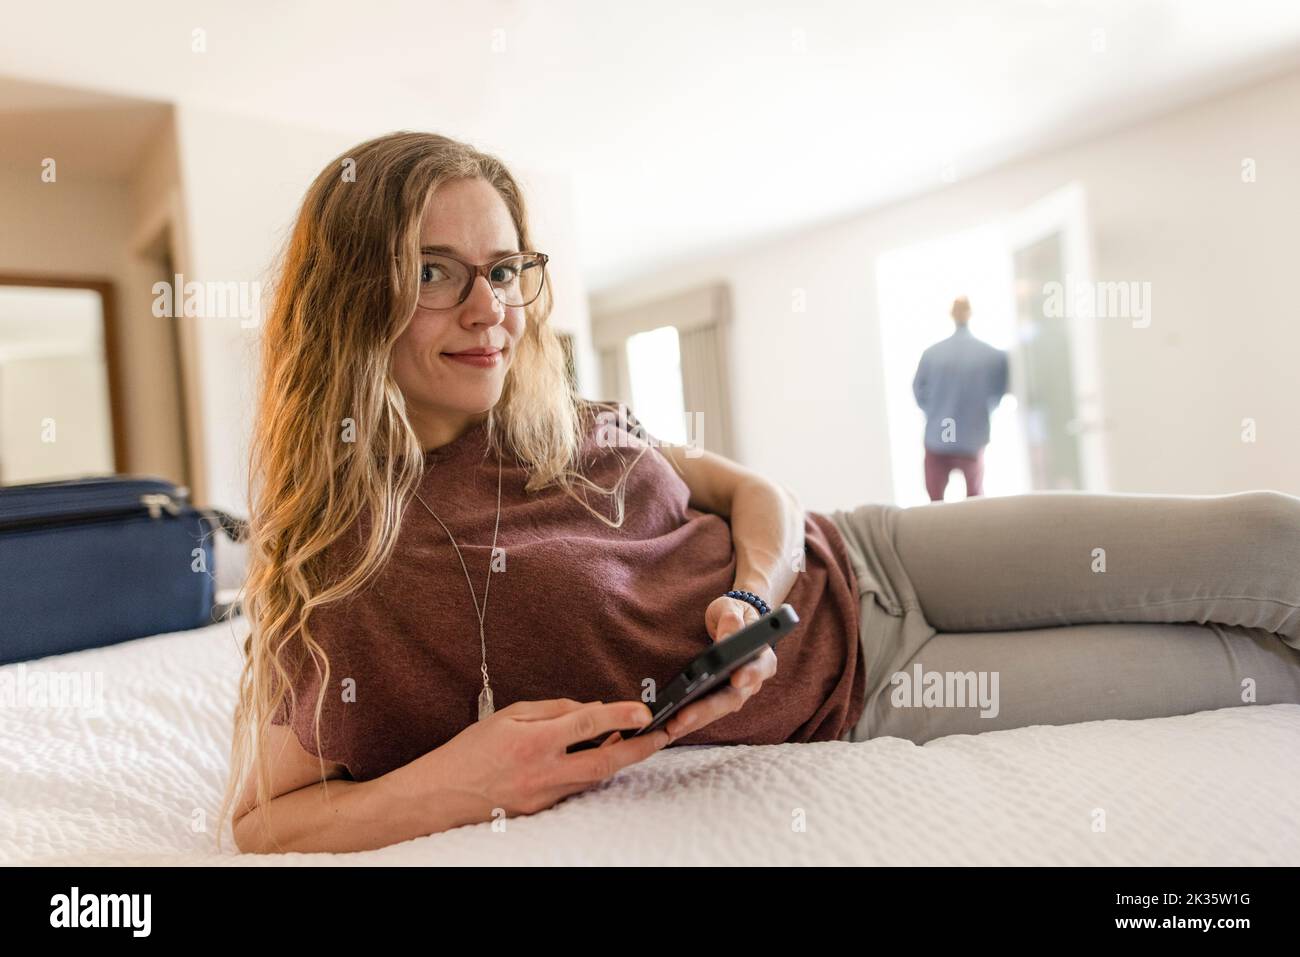 Portrait of woman looking at phone in hotel room Stock Photo